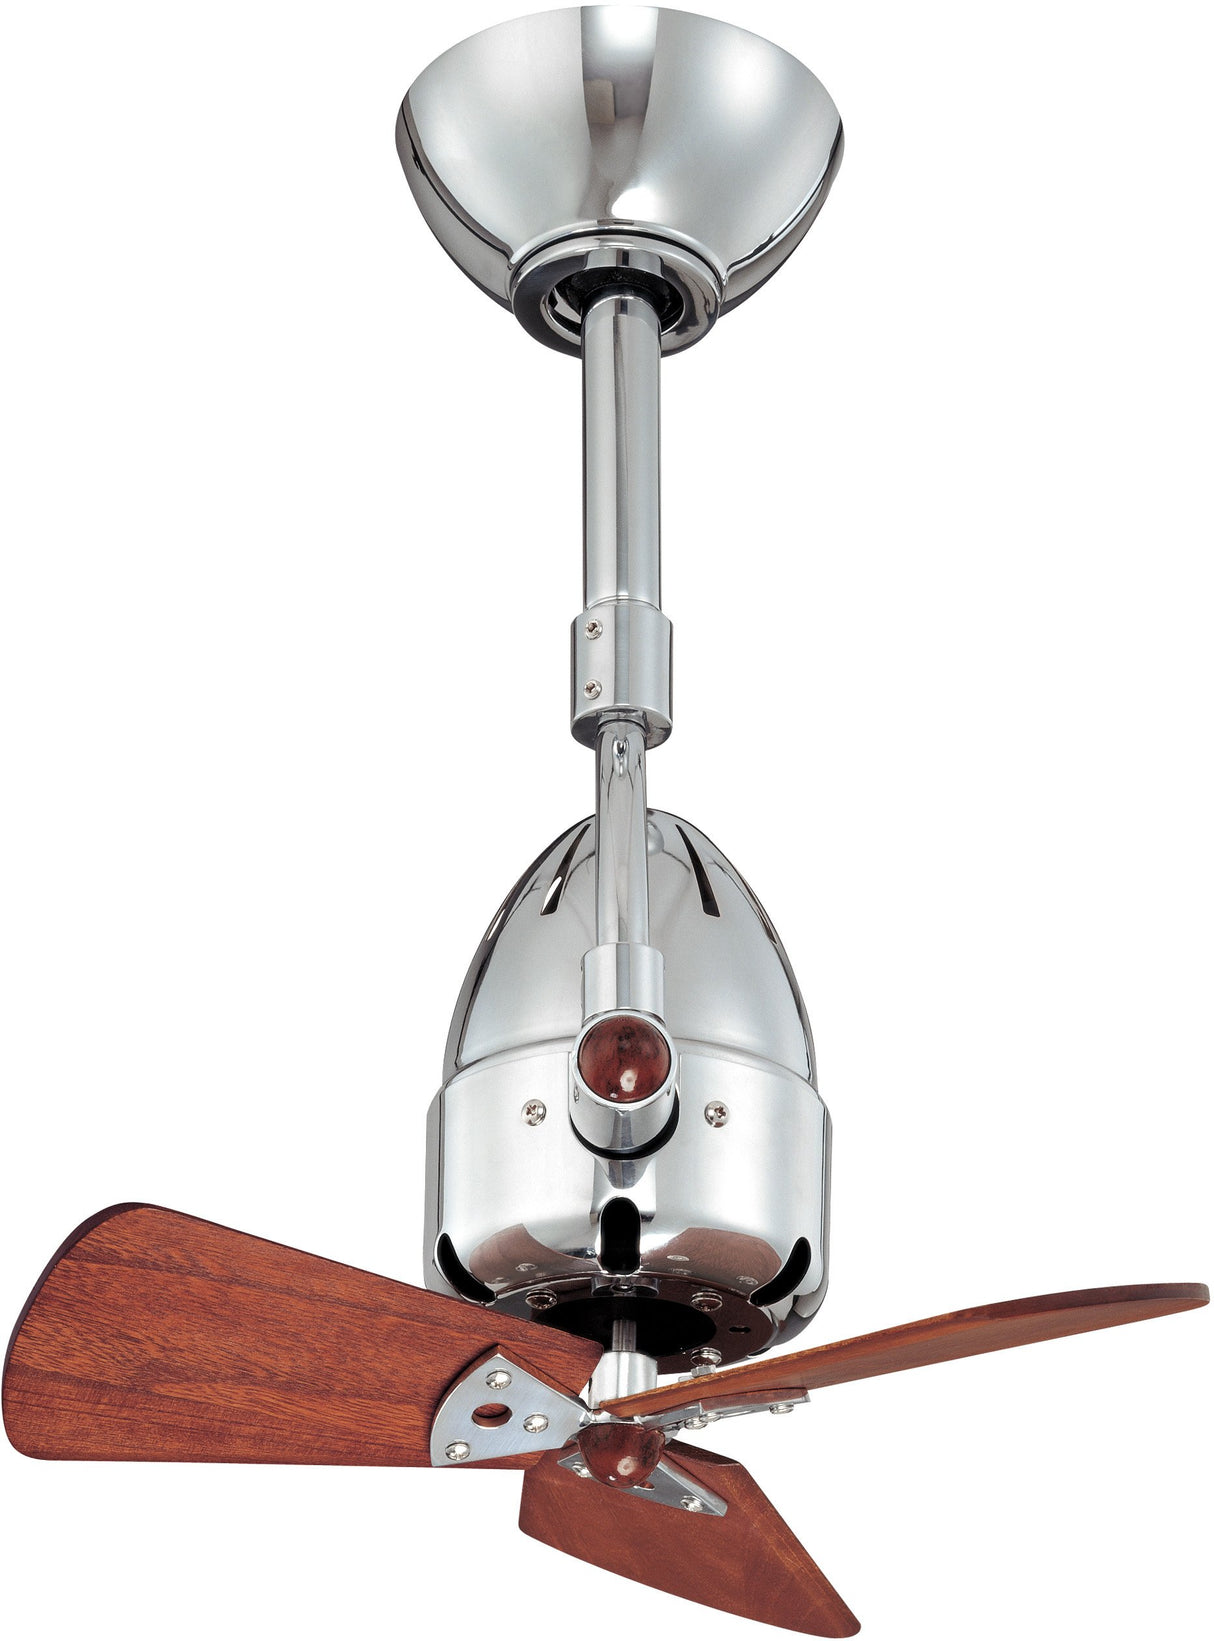 Matthews Fan DI-CR-WD Diane oscillating ceiling fan in Polished Chrome finish with solid mahogany tone wood blades.